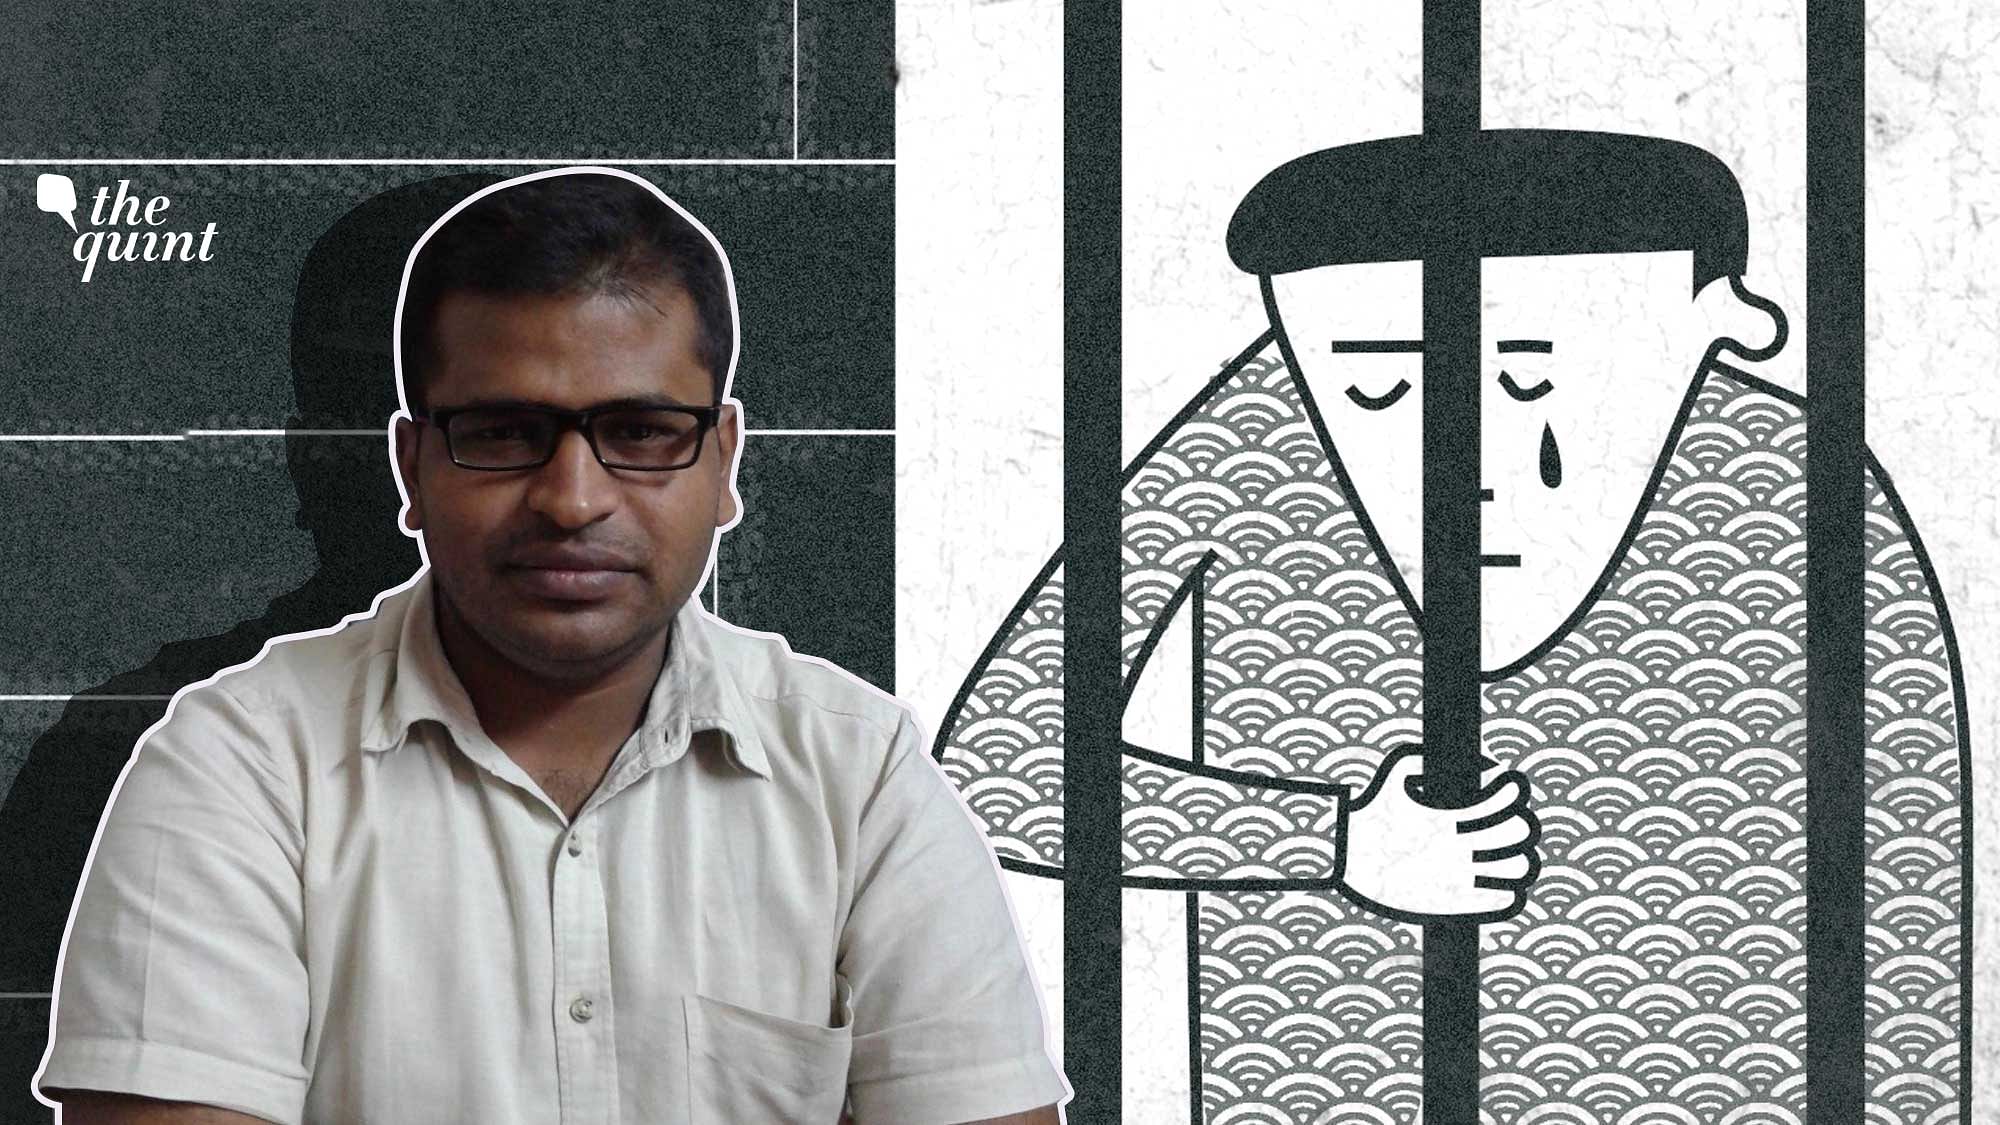 Lucknow-based activist Robin Verma talks about physical &amp; mental torture inflicted while in custody during CAA stir.